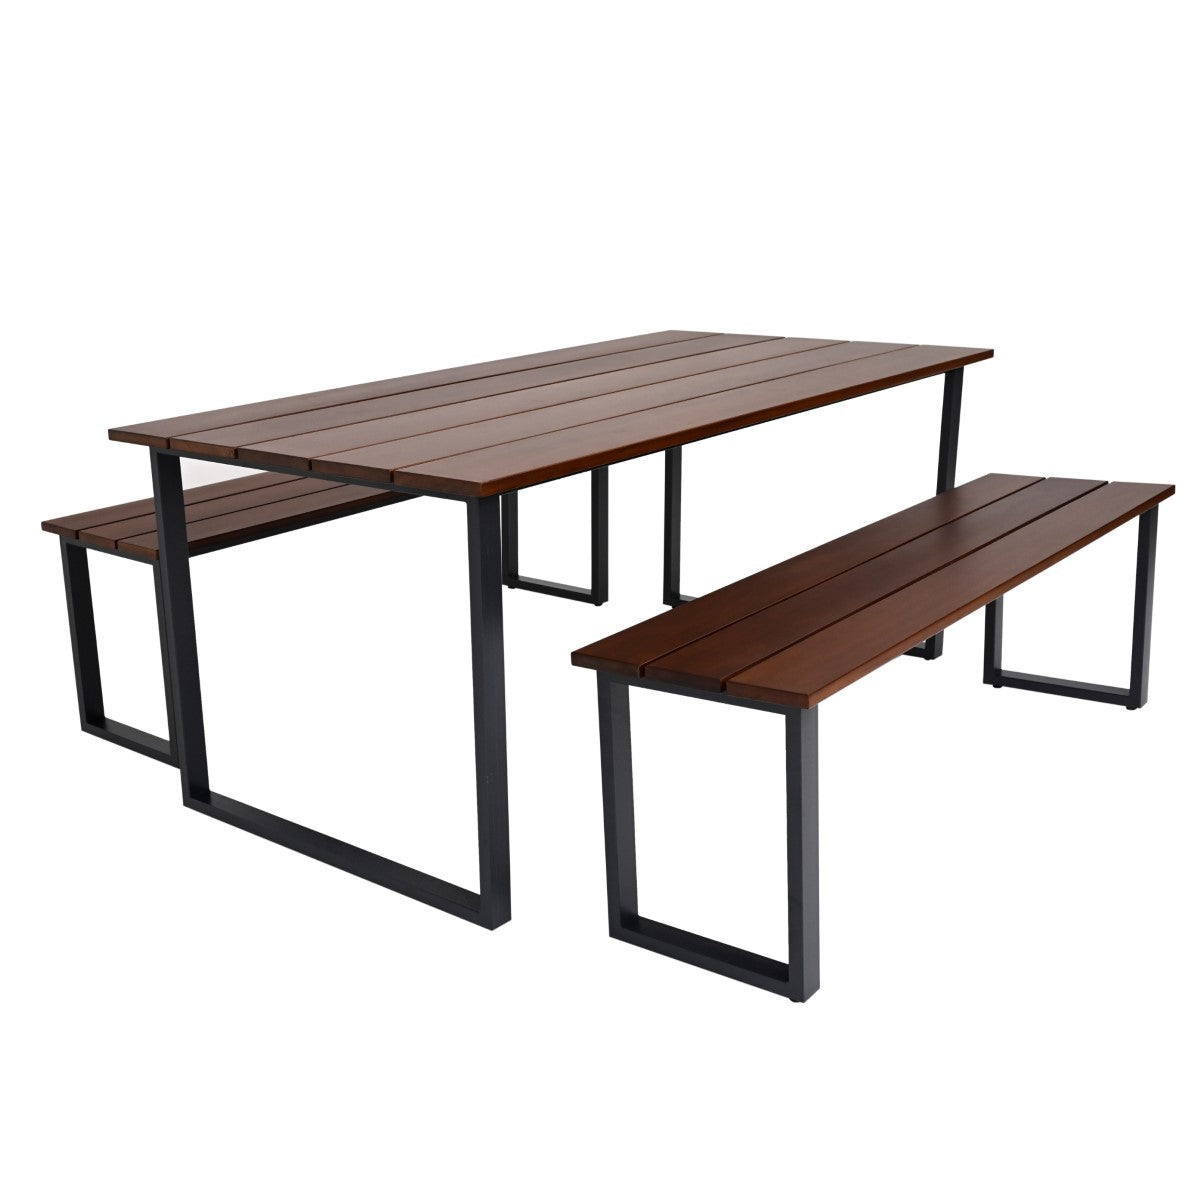 Outdoor 6 Person Dining Table With 2 Benches